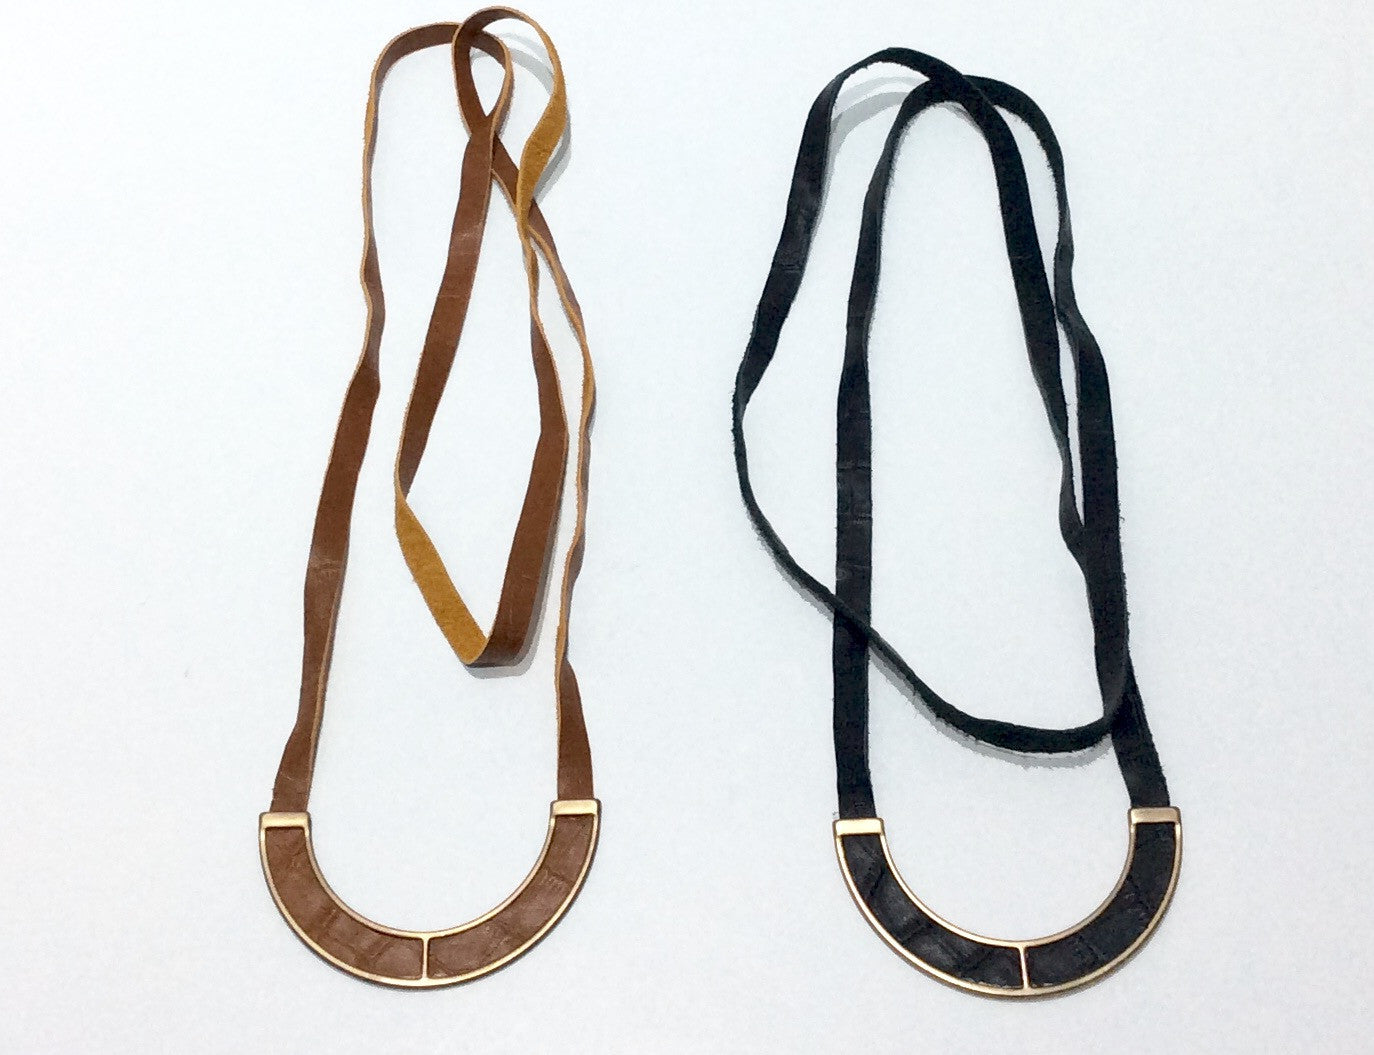 Necklace-Long suede cord with cord woven through stirrup design